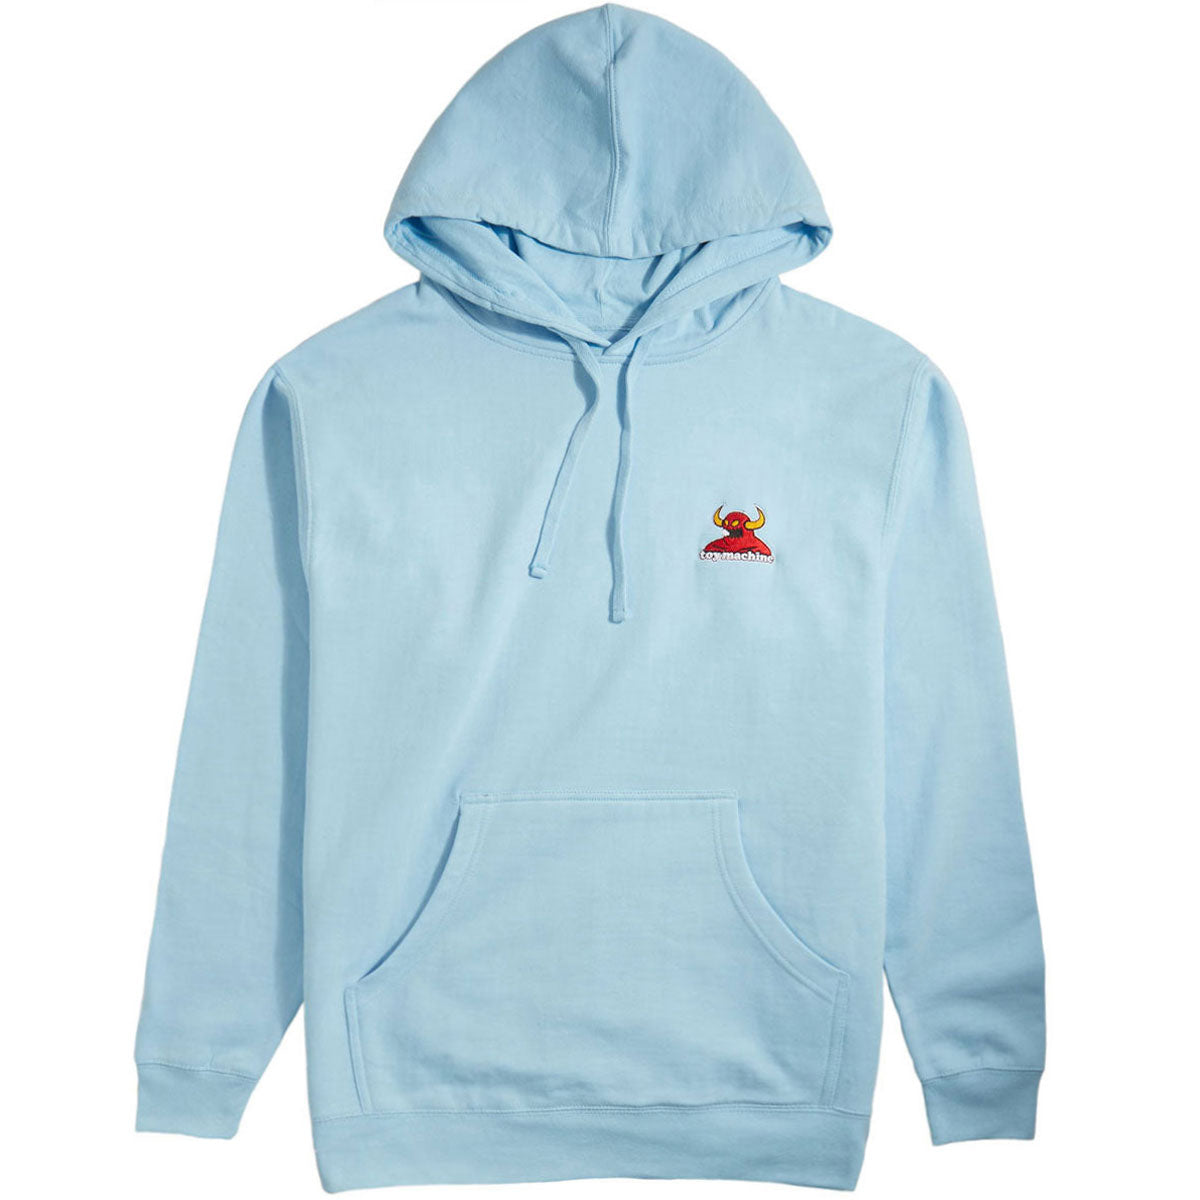 Toy Machine Monster Embroidered Hoodie - Blue image 1